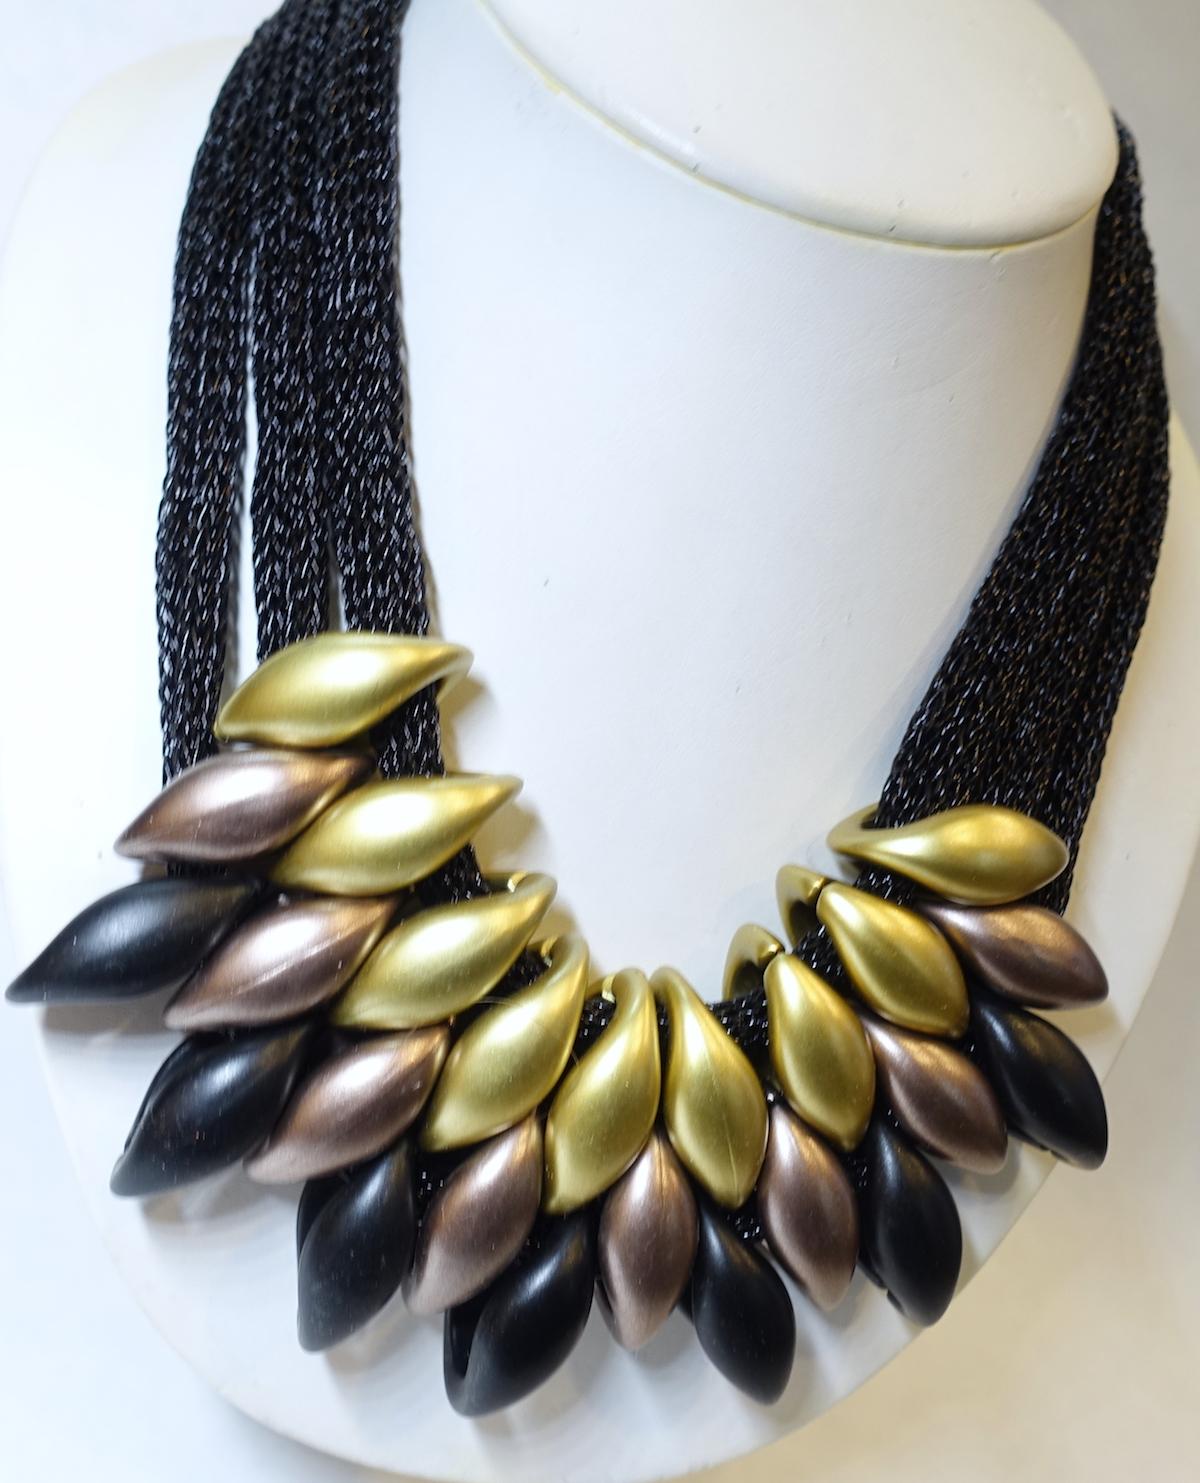 I just loved this necklace.  It’s so unique. This necklace has 3 rows of woven black threads leading down to gold, black and dark copper resin marquis shaped drops overlapping each other. The necklace measures 22” long with a spring clasp and each